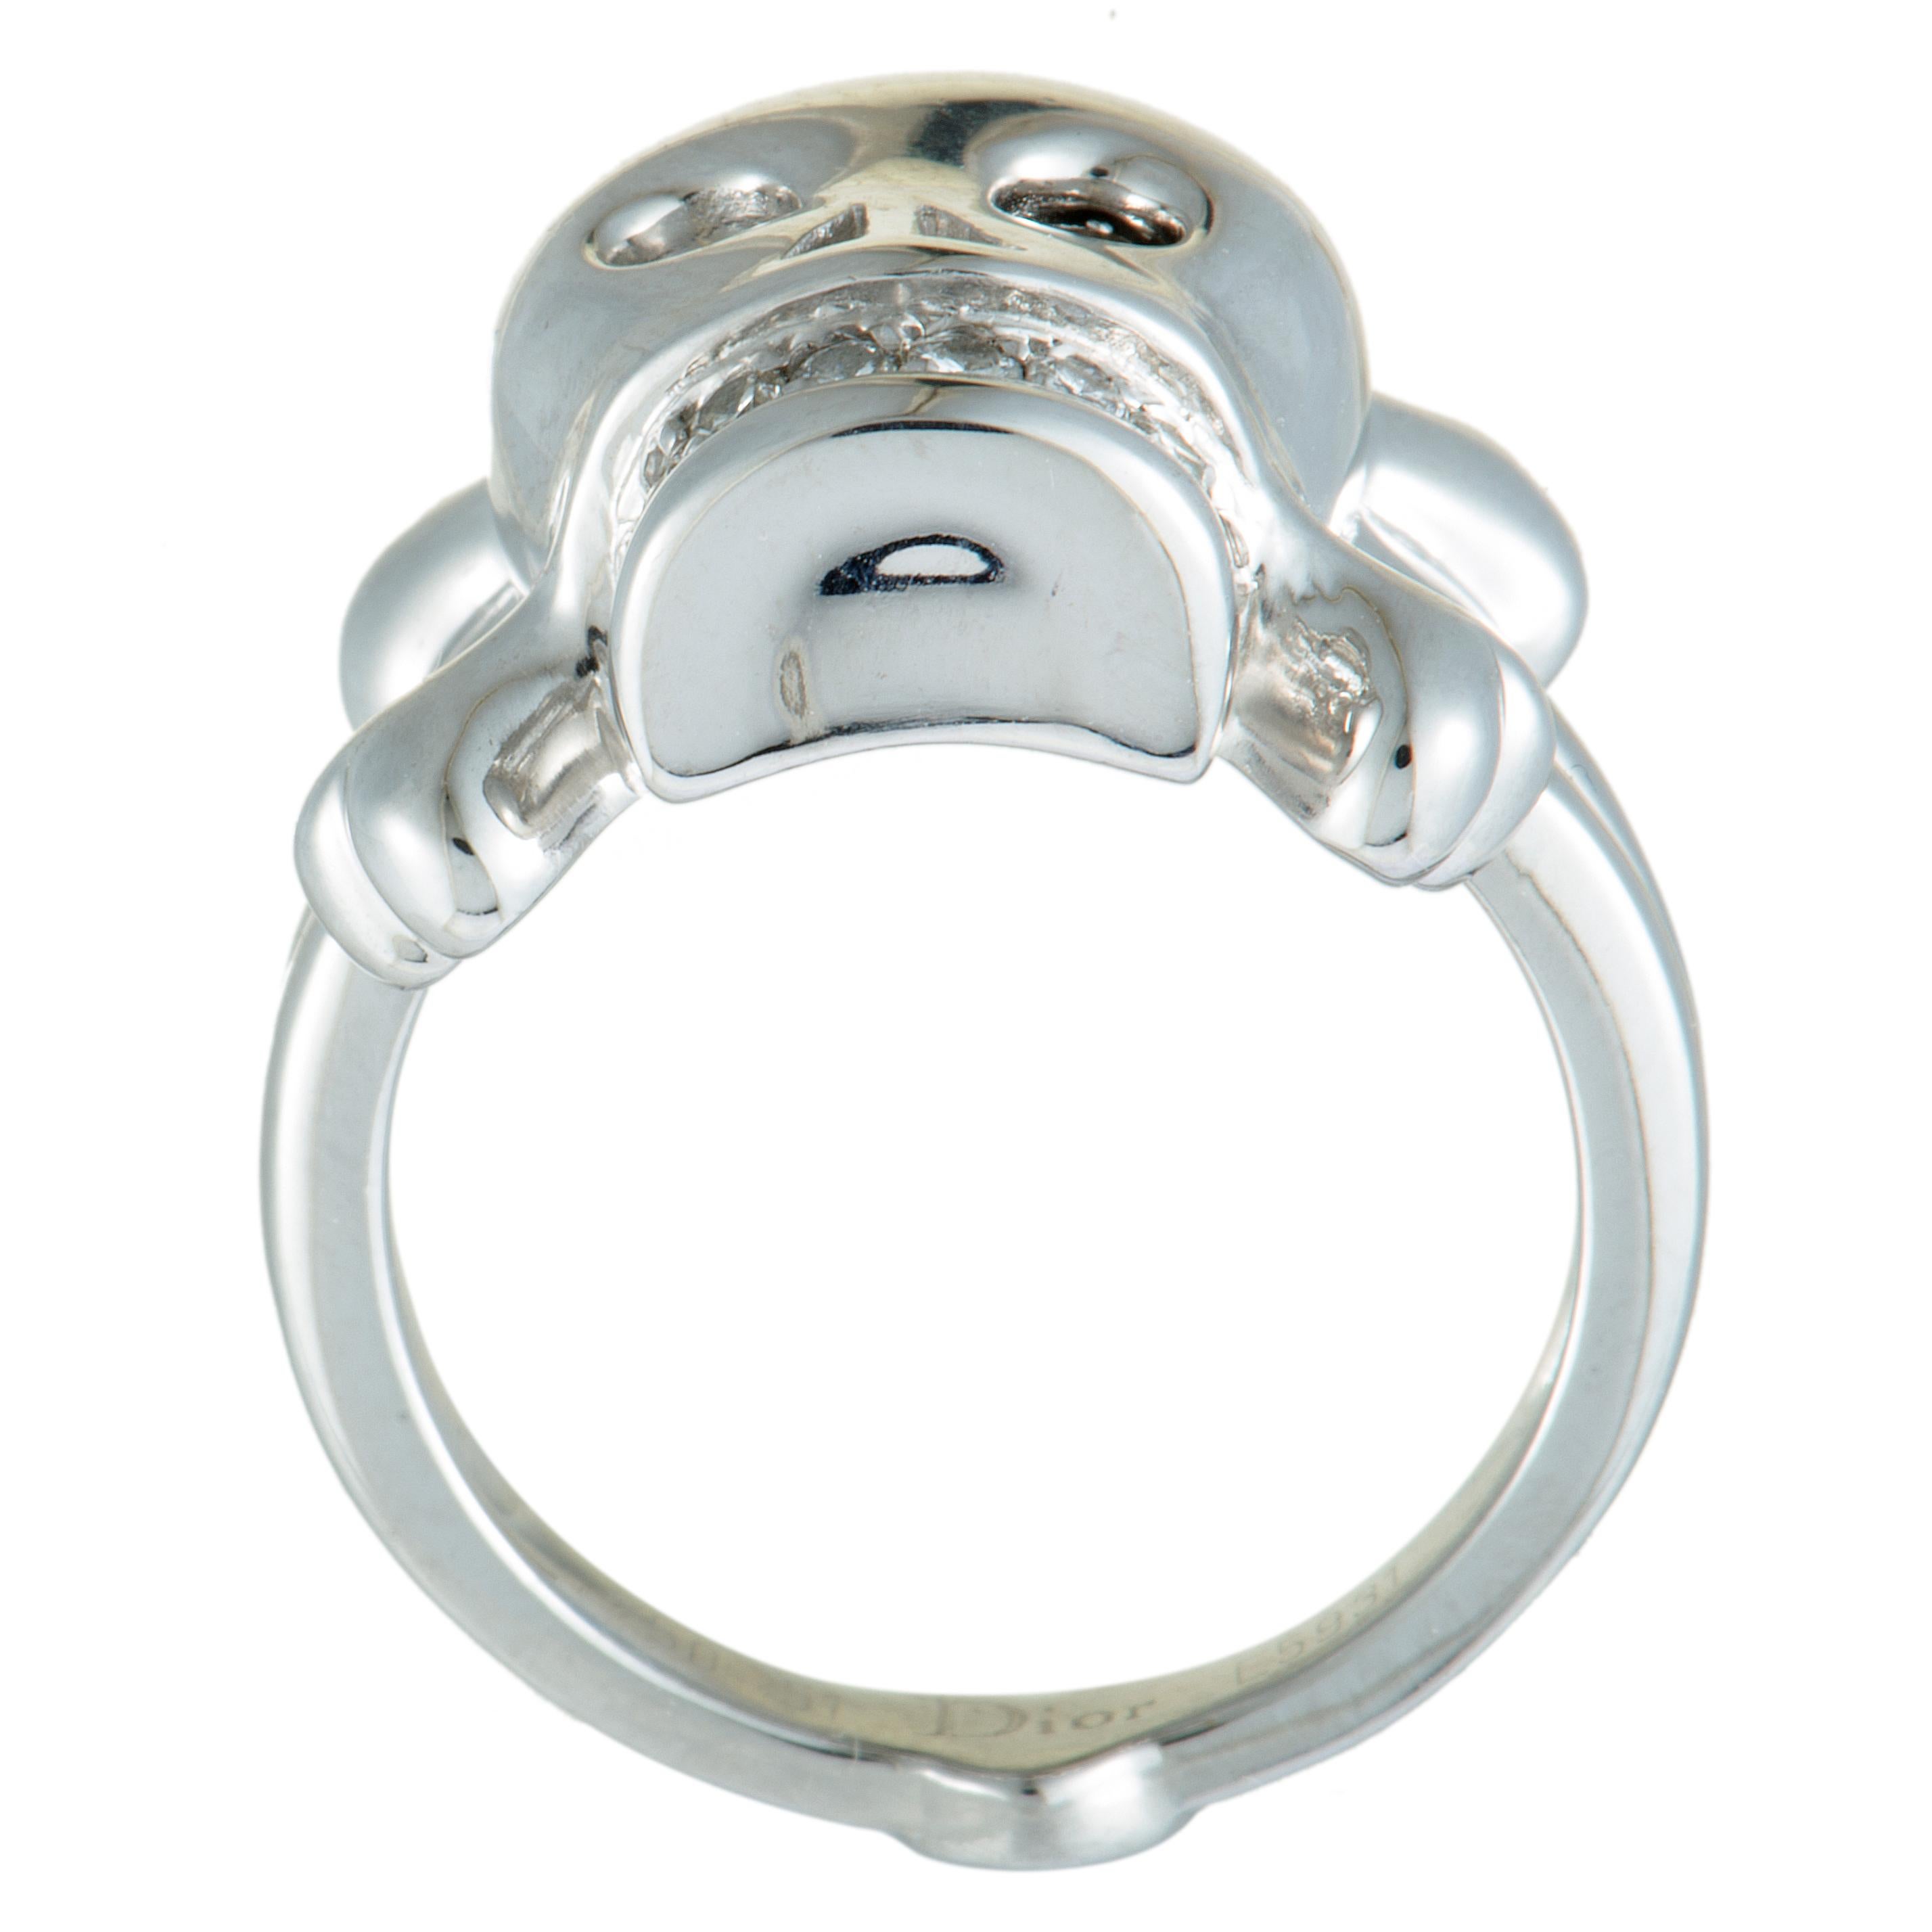 Extraordinarily designed for the exceptional “Tête de Mort” collection, this eye-catching Dior ring boasts an incredibly offbeat skull motif, offering a stunningly fashionable look. The ring is splendidly crafted from 18K white gold and it is